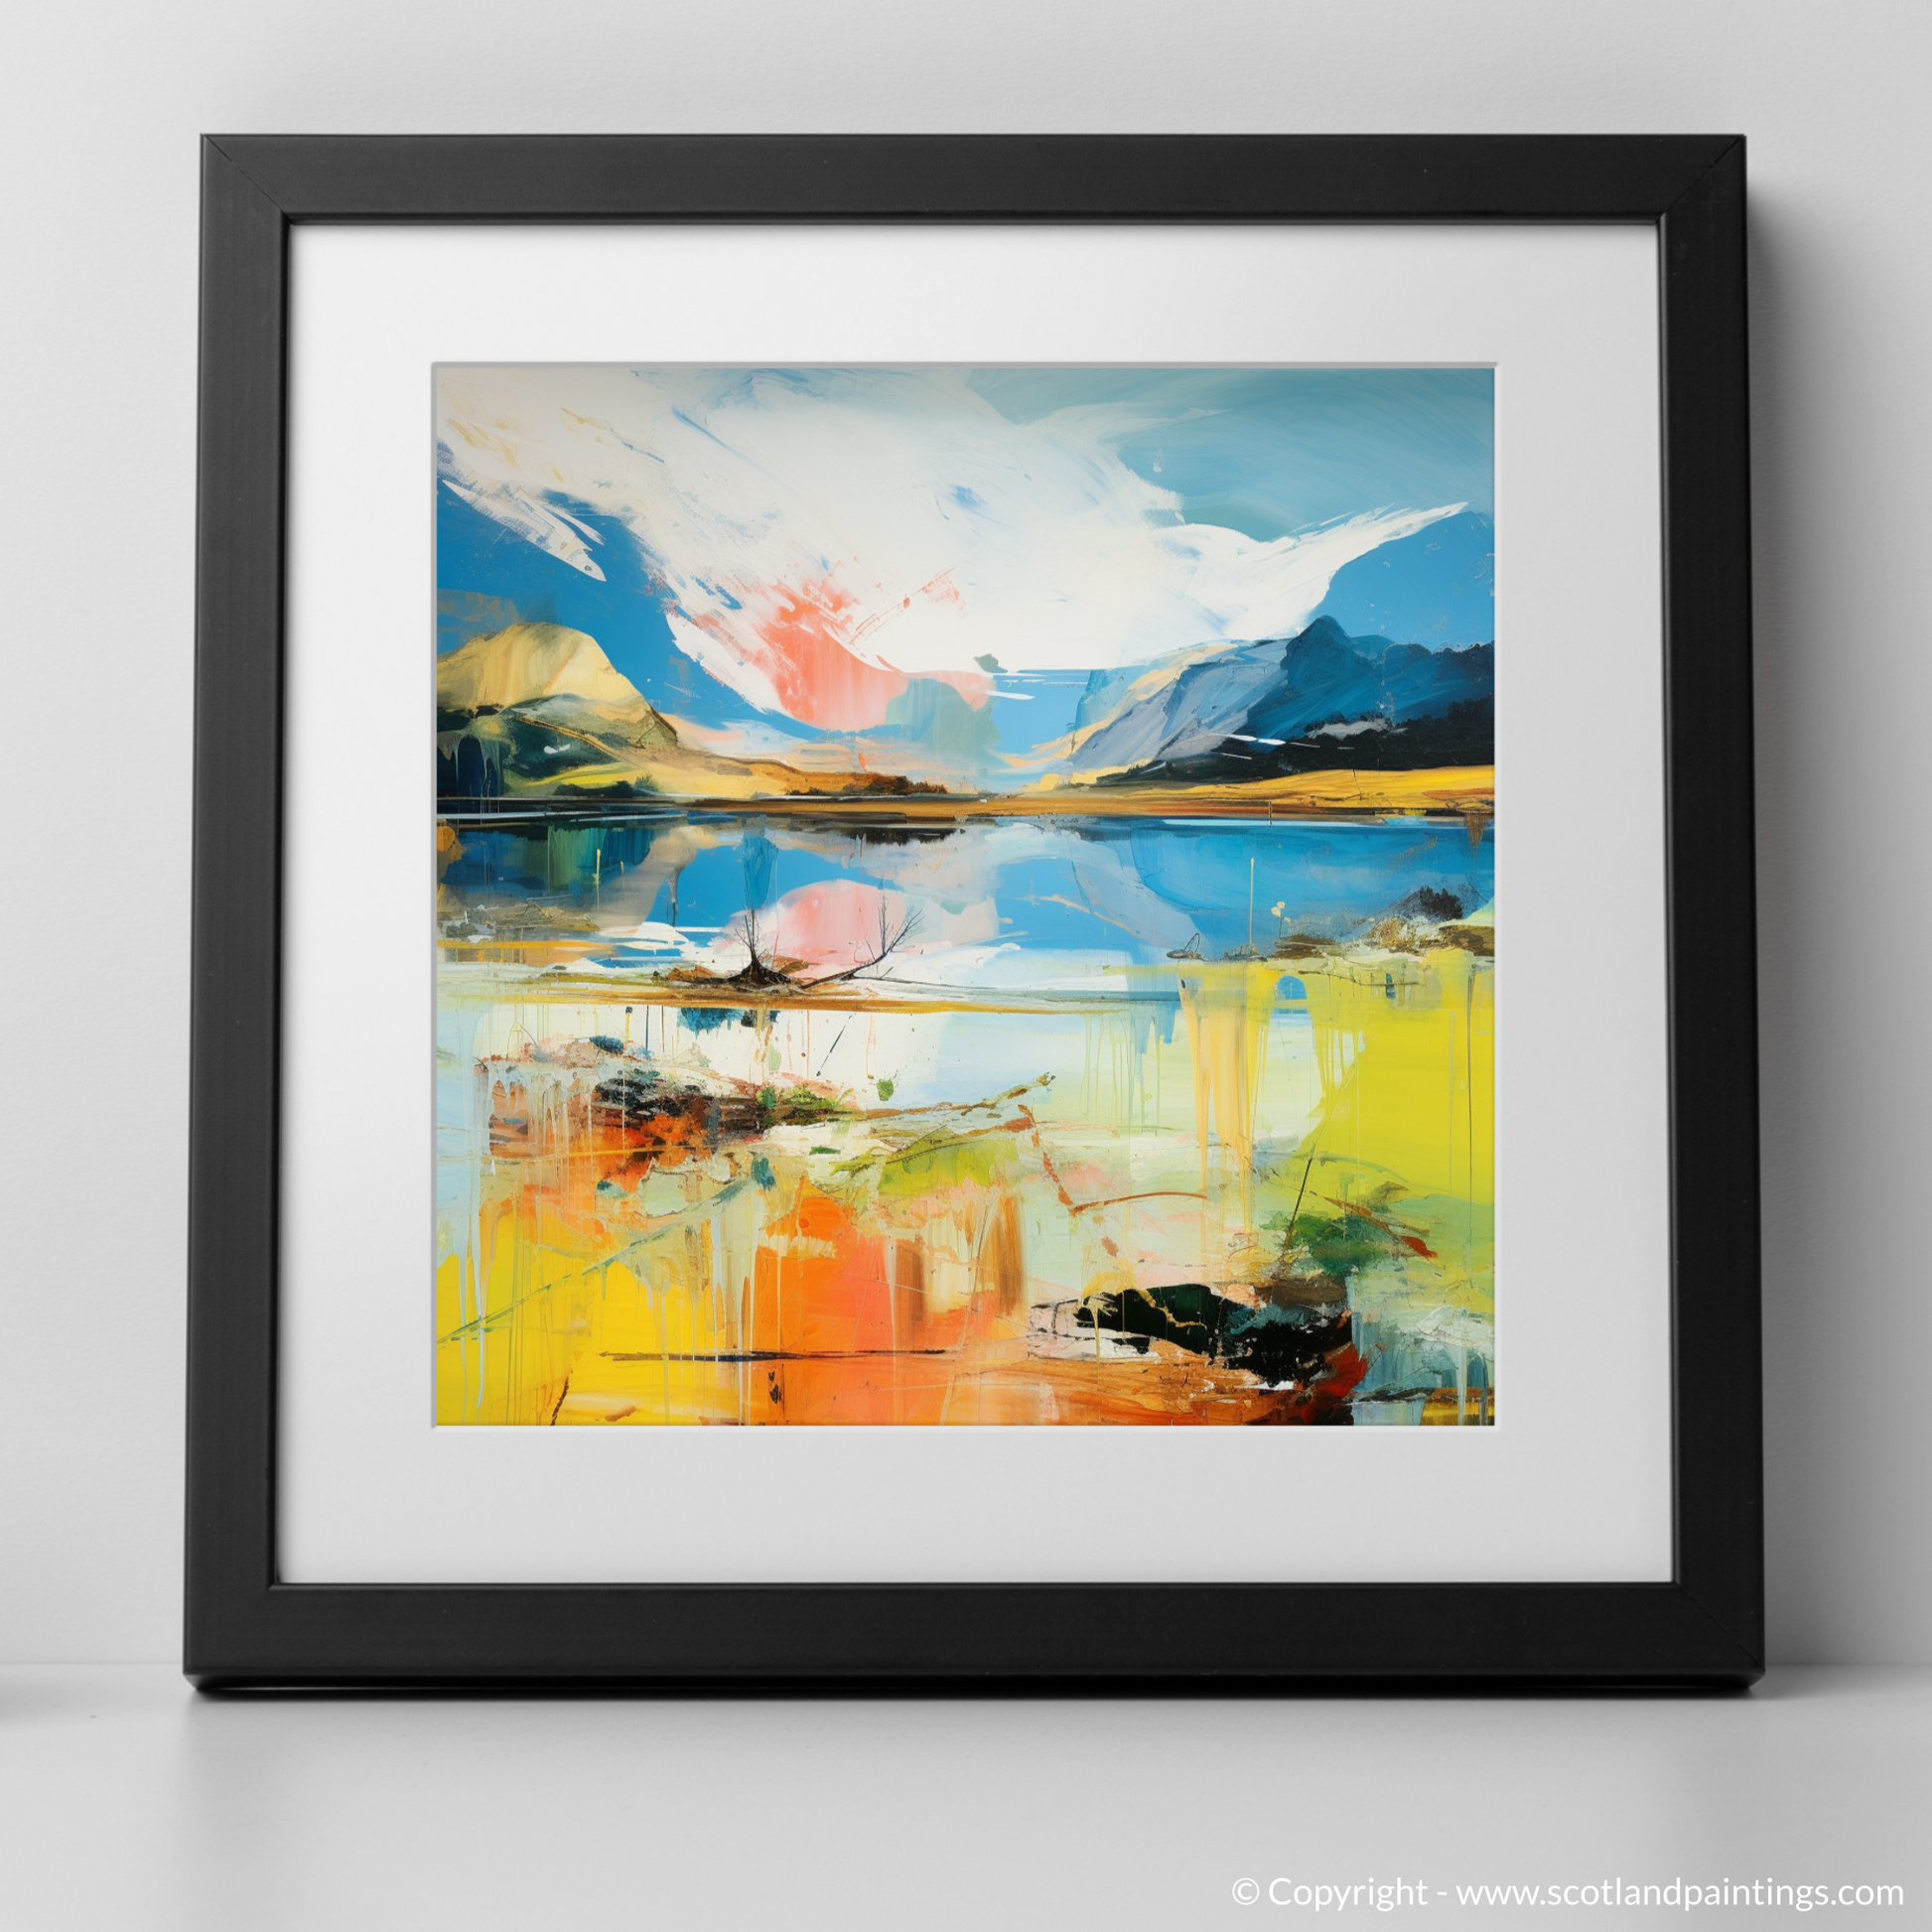 Art Print of Loch Awe, Argyll and Bute in summer with a black frame